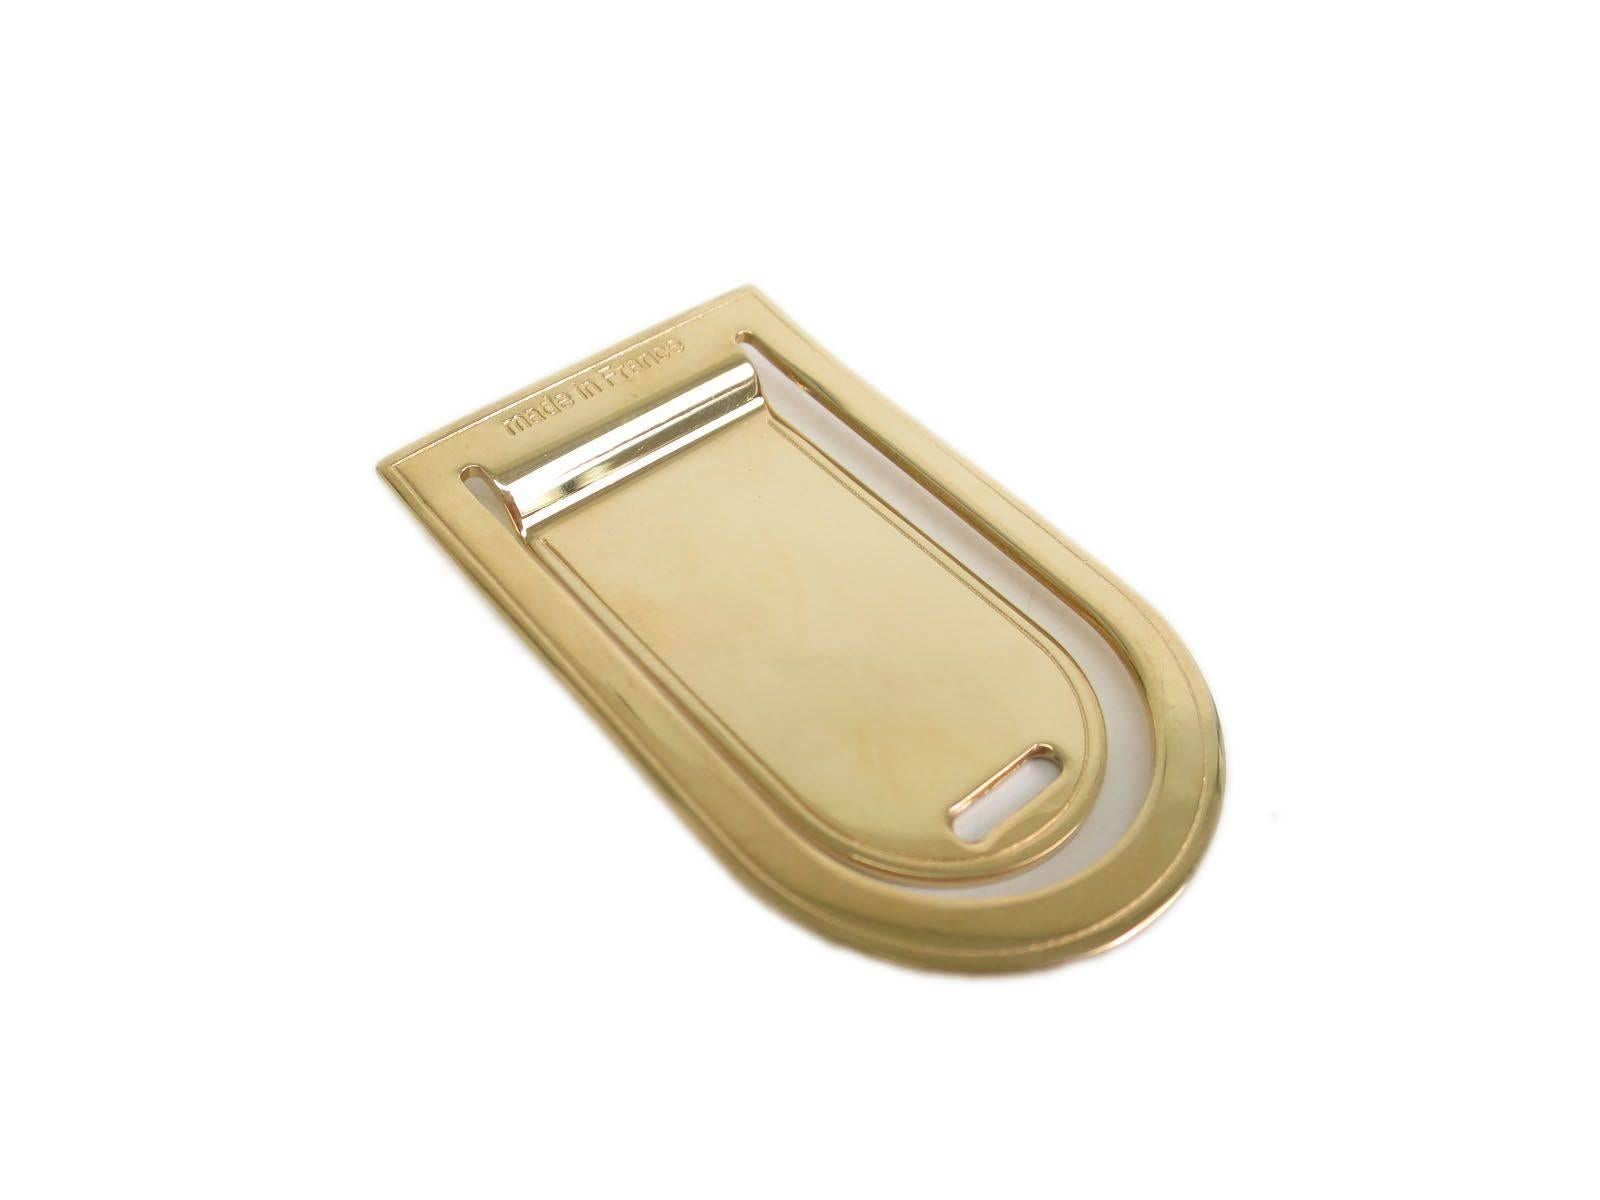 CURATOR'S NOTES

Respect your money with this gold tone Louis Vuitton money clip.

Gold tone
Made in France
Measures 2